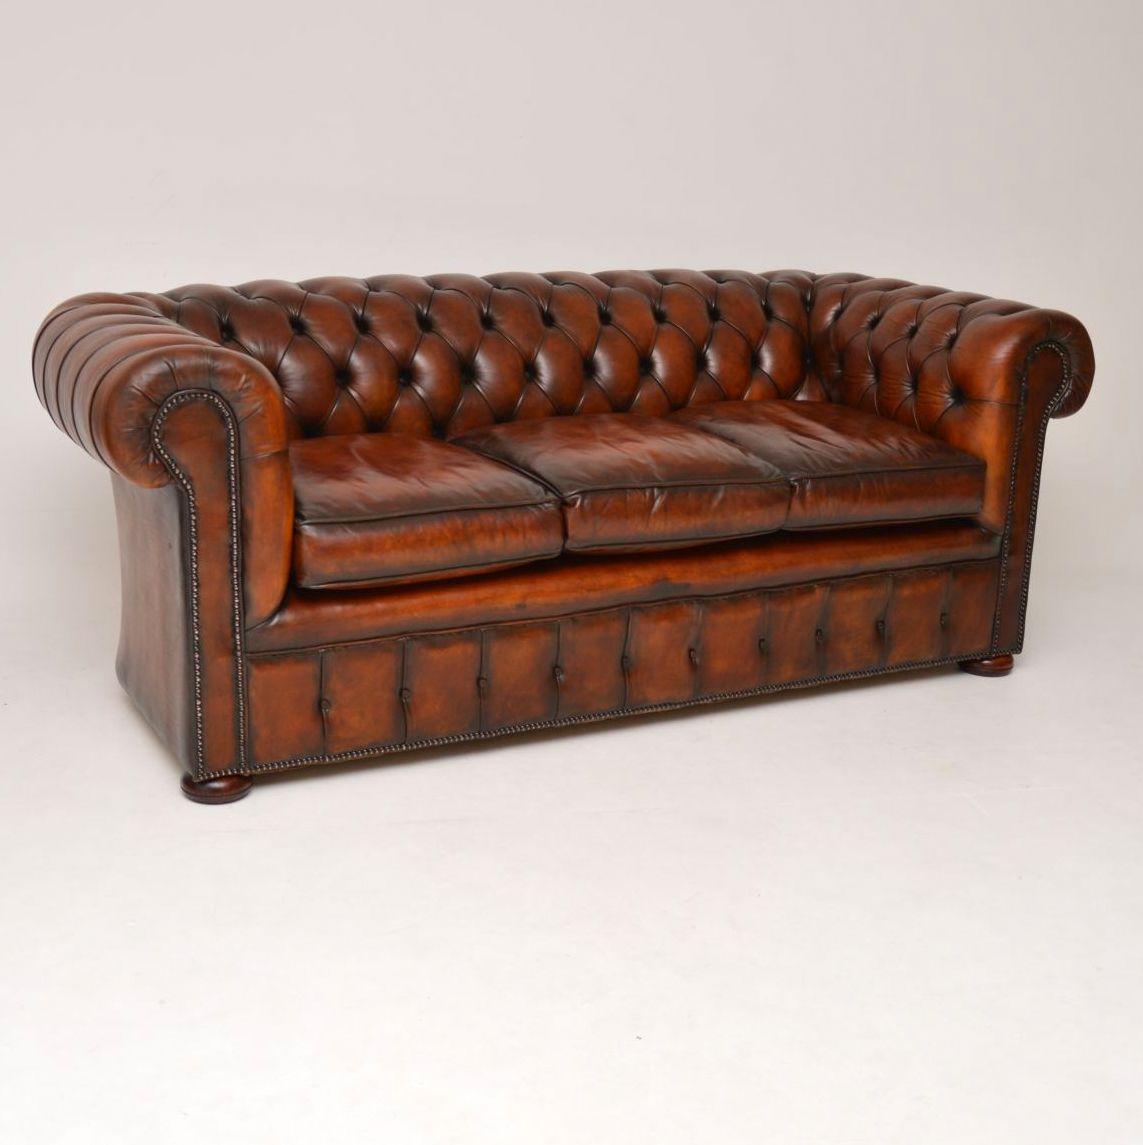 English Pair of Antique Deep Buttoned Leather Chesterfield Sofas